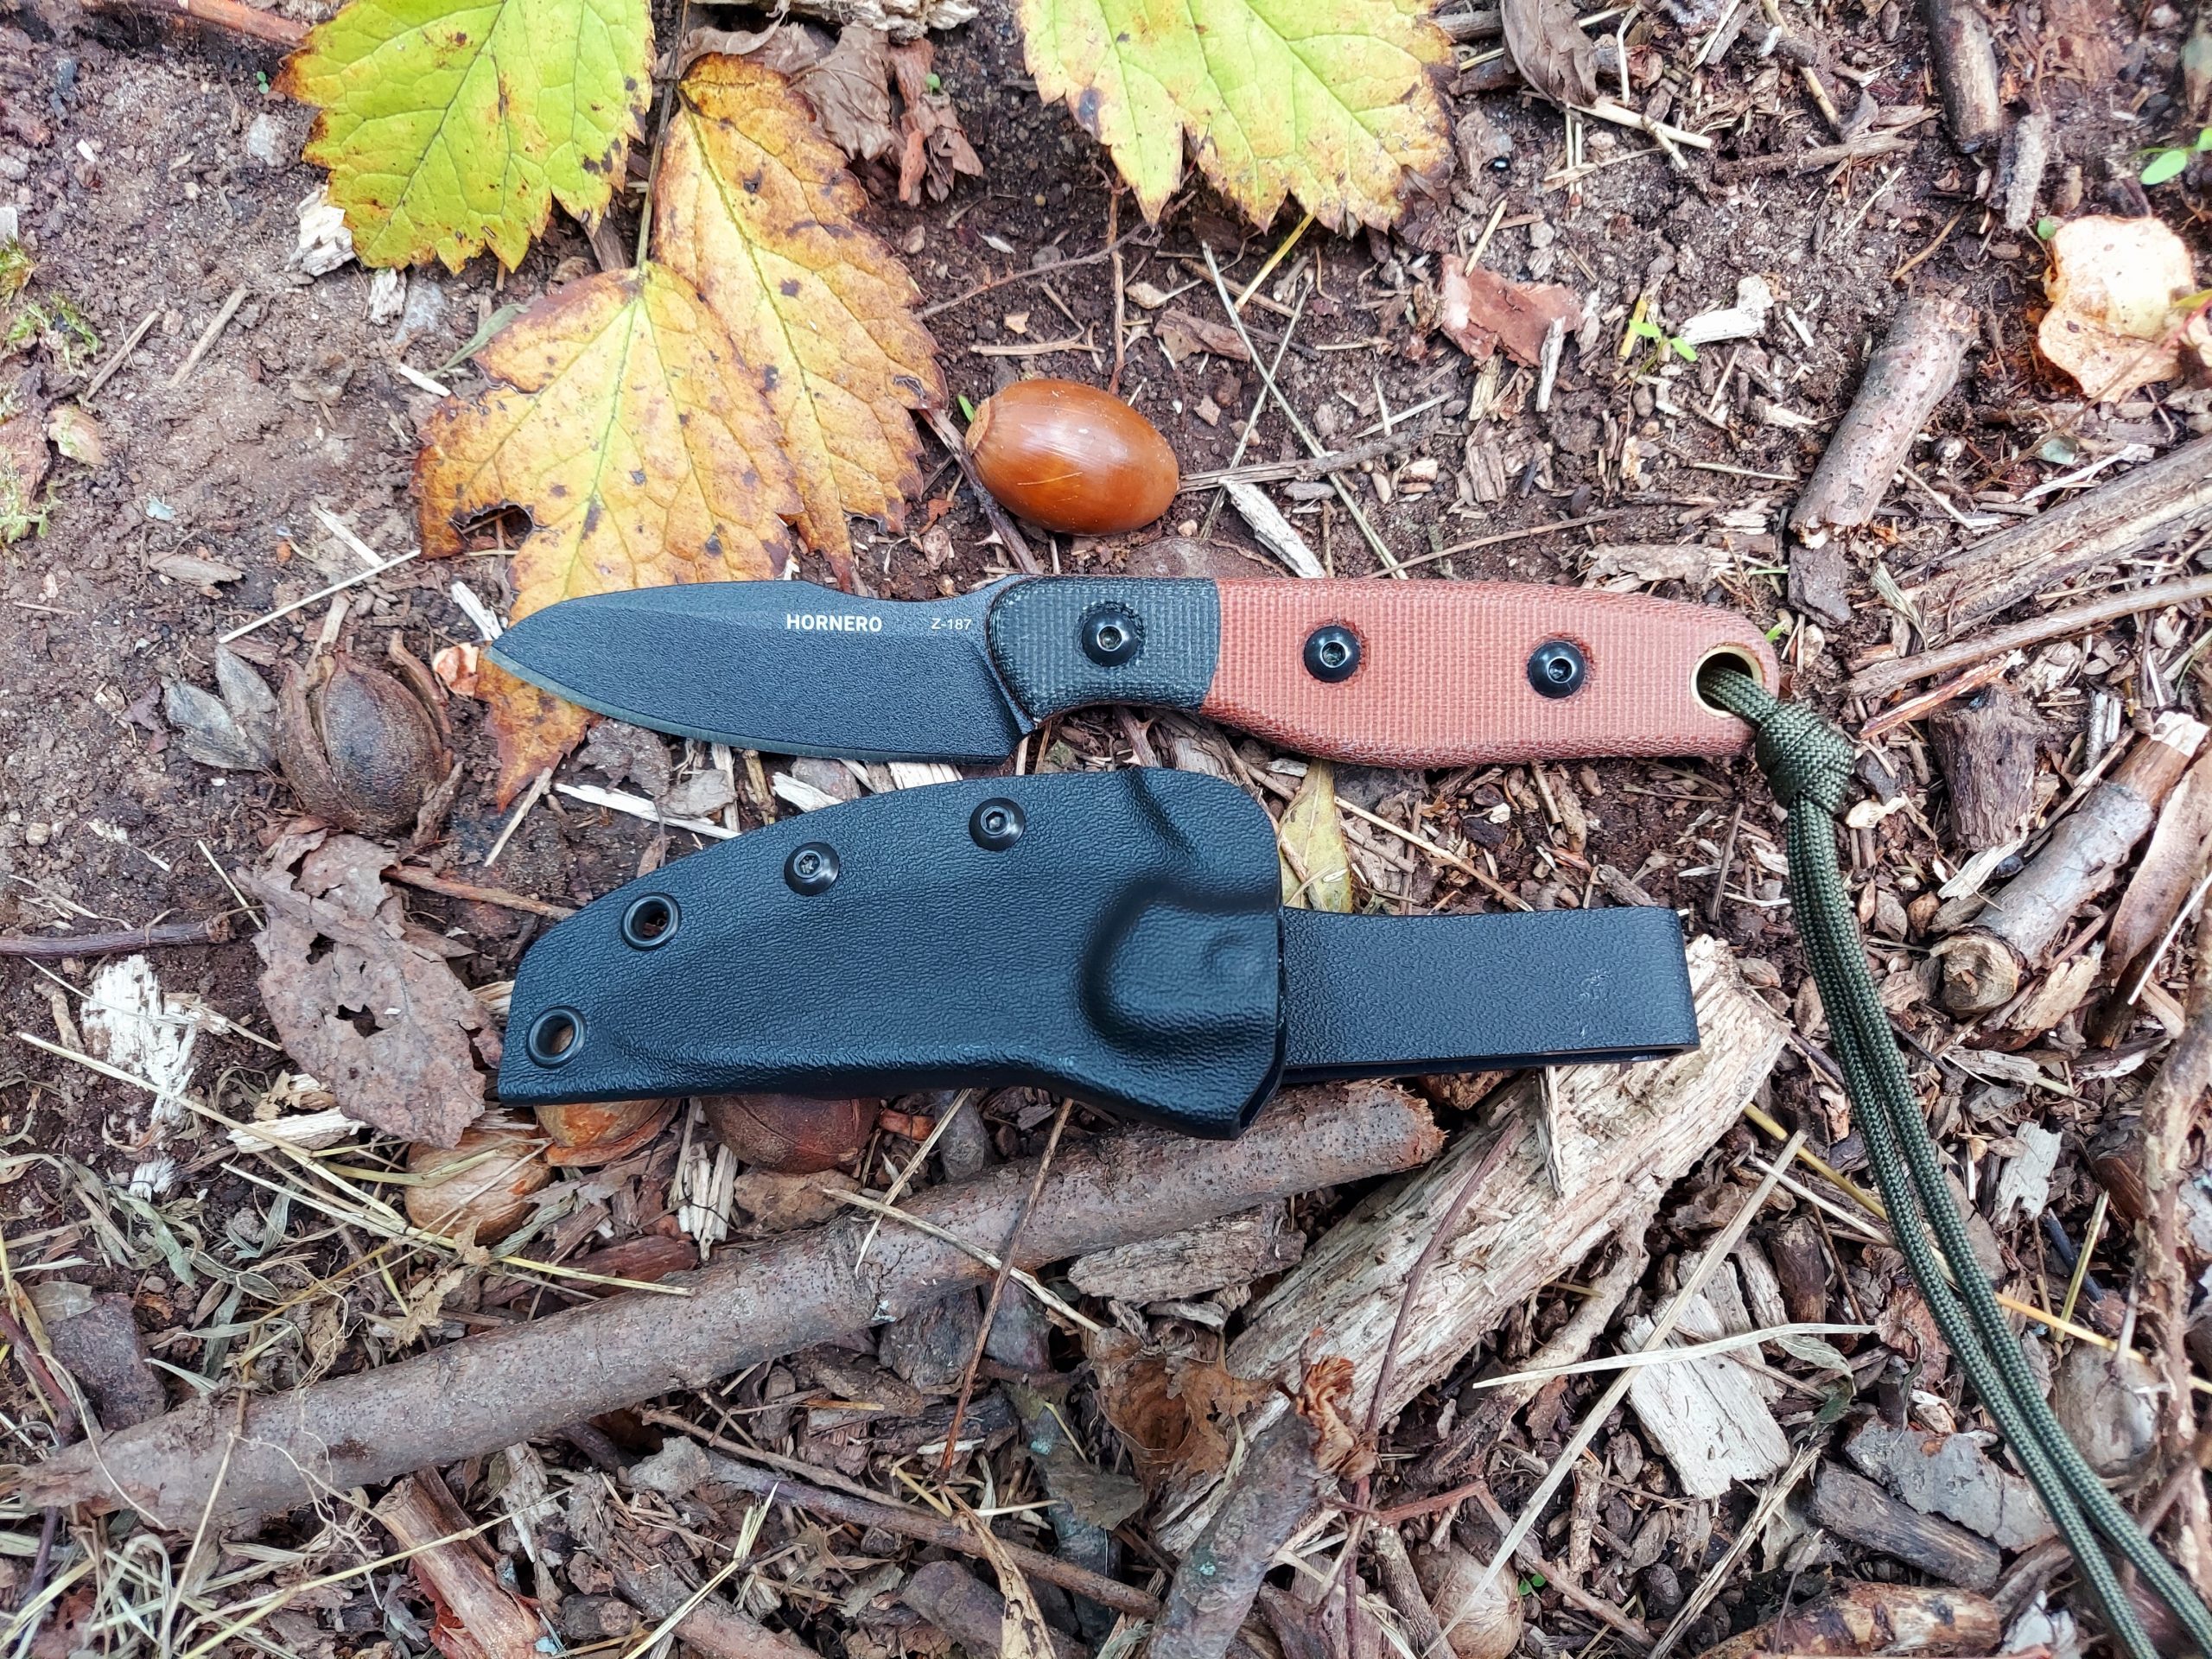 TOPS Hornero sheats belt clip can be repositioned for different options and the lanyard is a nice touch. You won’t notice that you’re carrying a knife until you need it because of the small size and light weight. And it’s made in the USA!